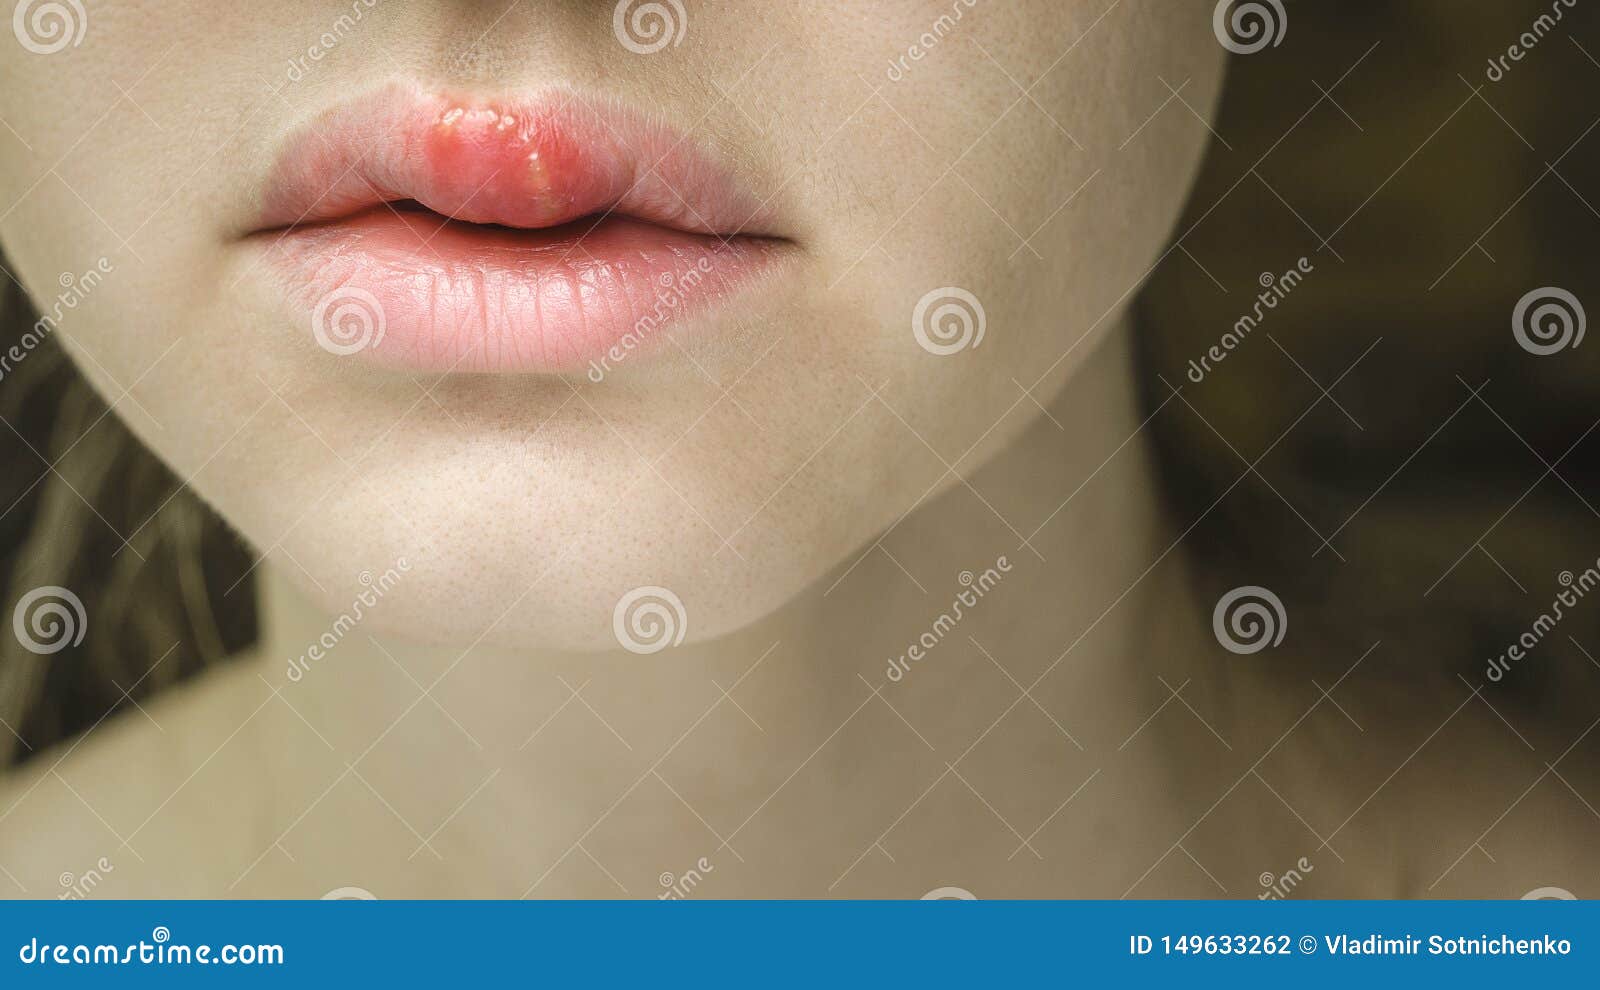 herpes simplex virus on the upper lip of a young beautiful woman.